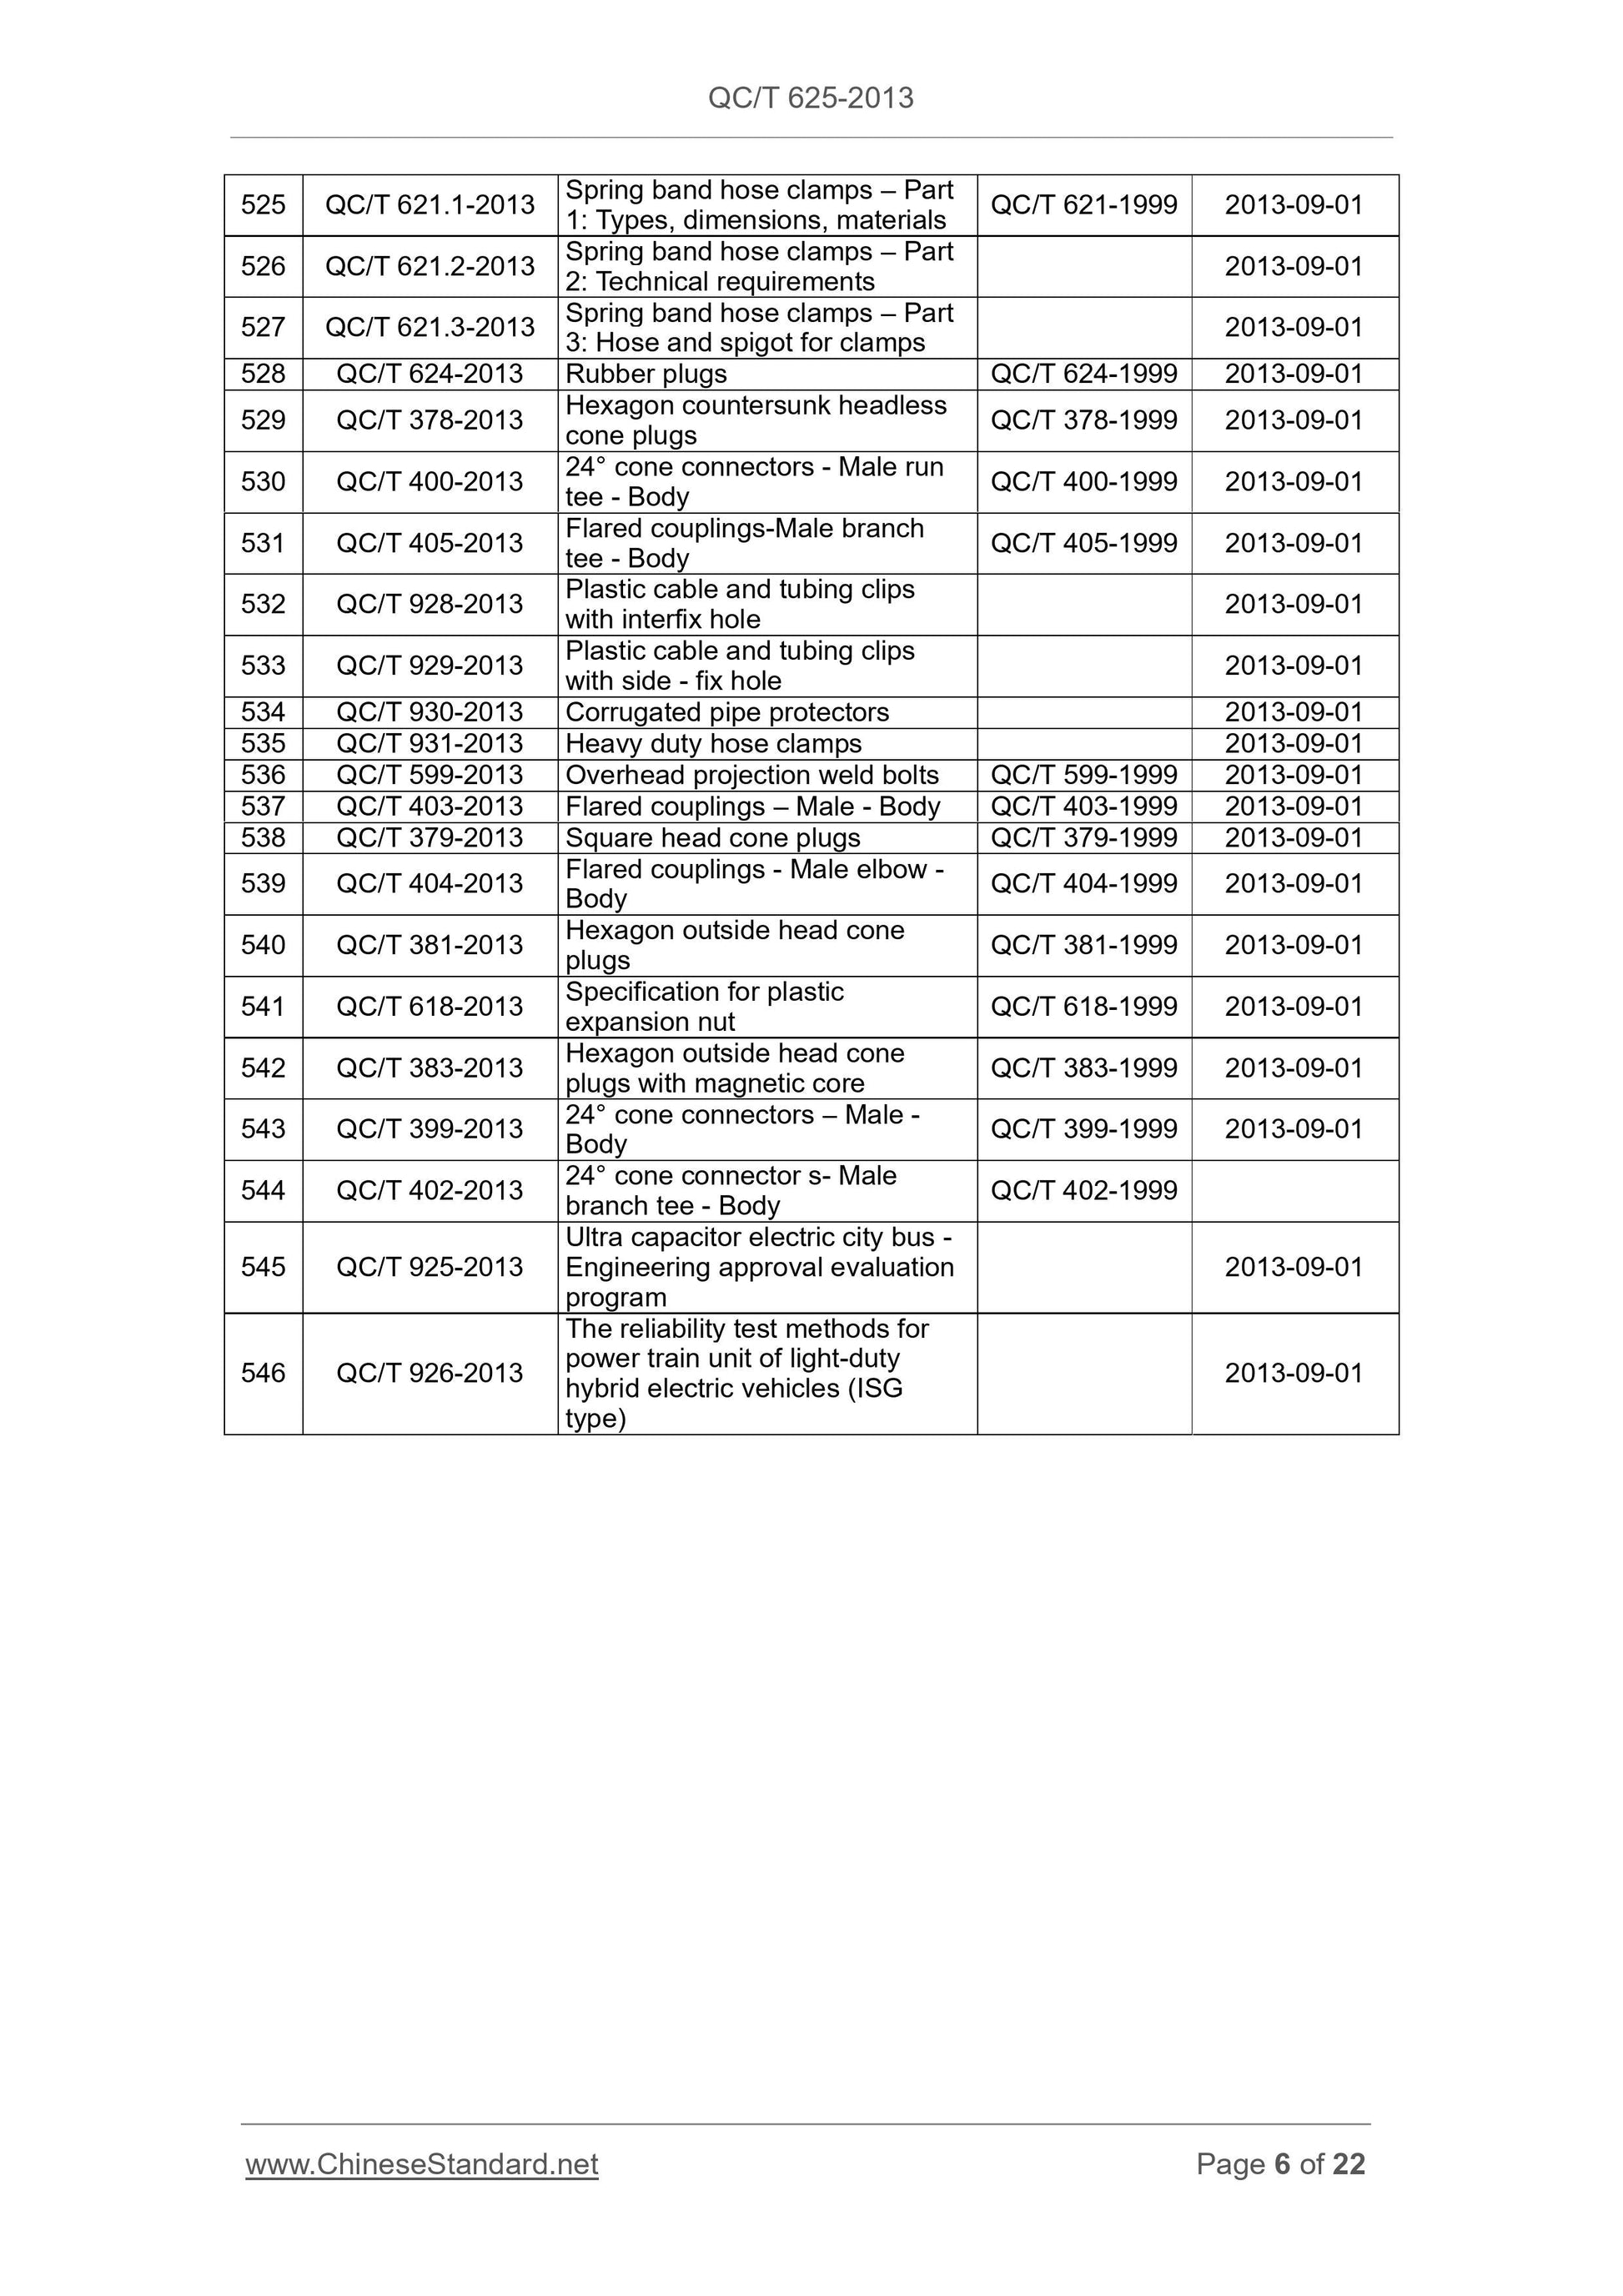 QC/T 625-2013 Page 6